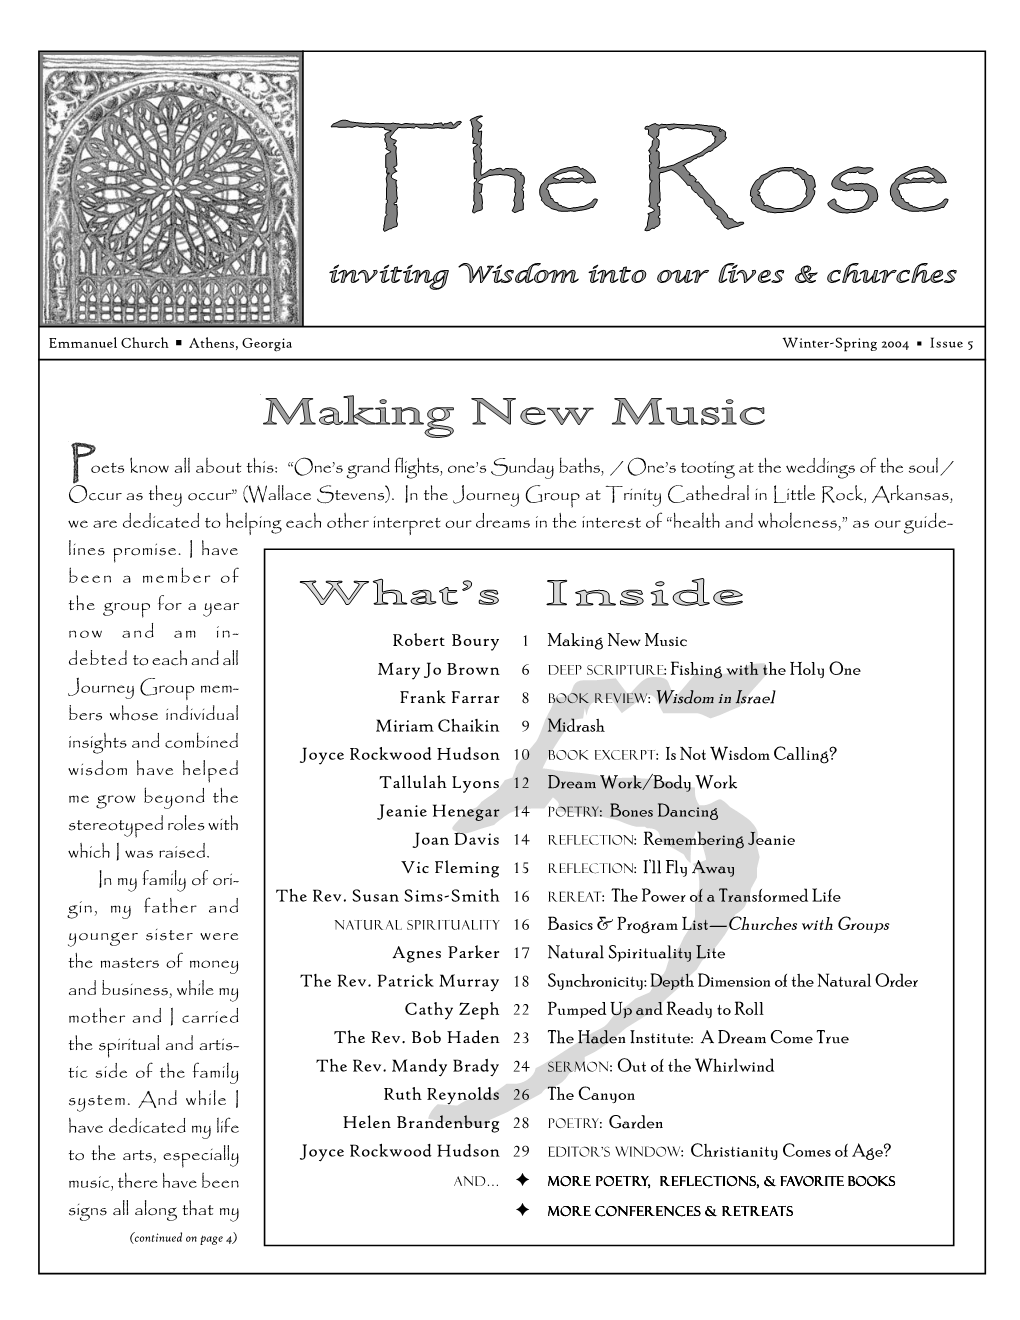 Rose 5 Winter-Spring 2004 Deep Scripture from the Teachings from the Shallow Water? Jesus Asked Only a Few, but at First They Resisted Because They Were Tired